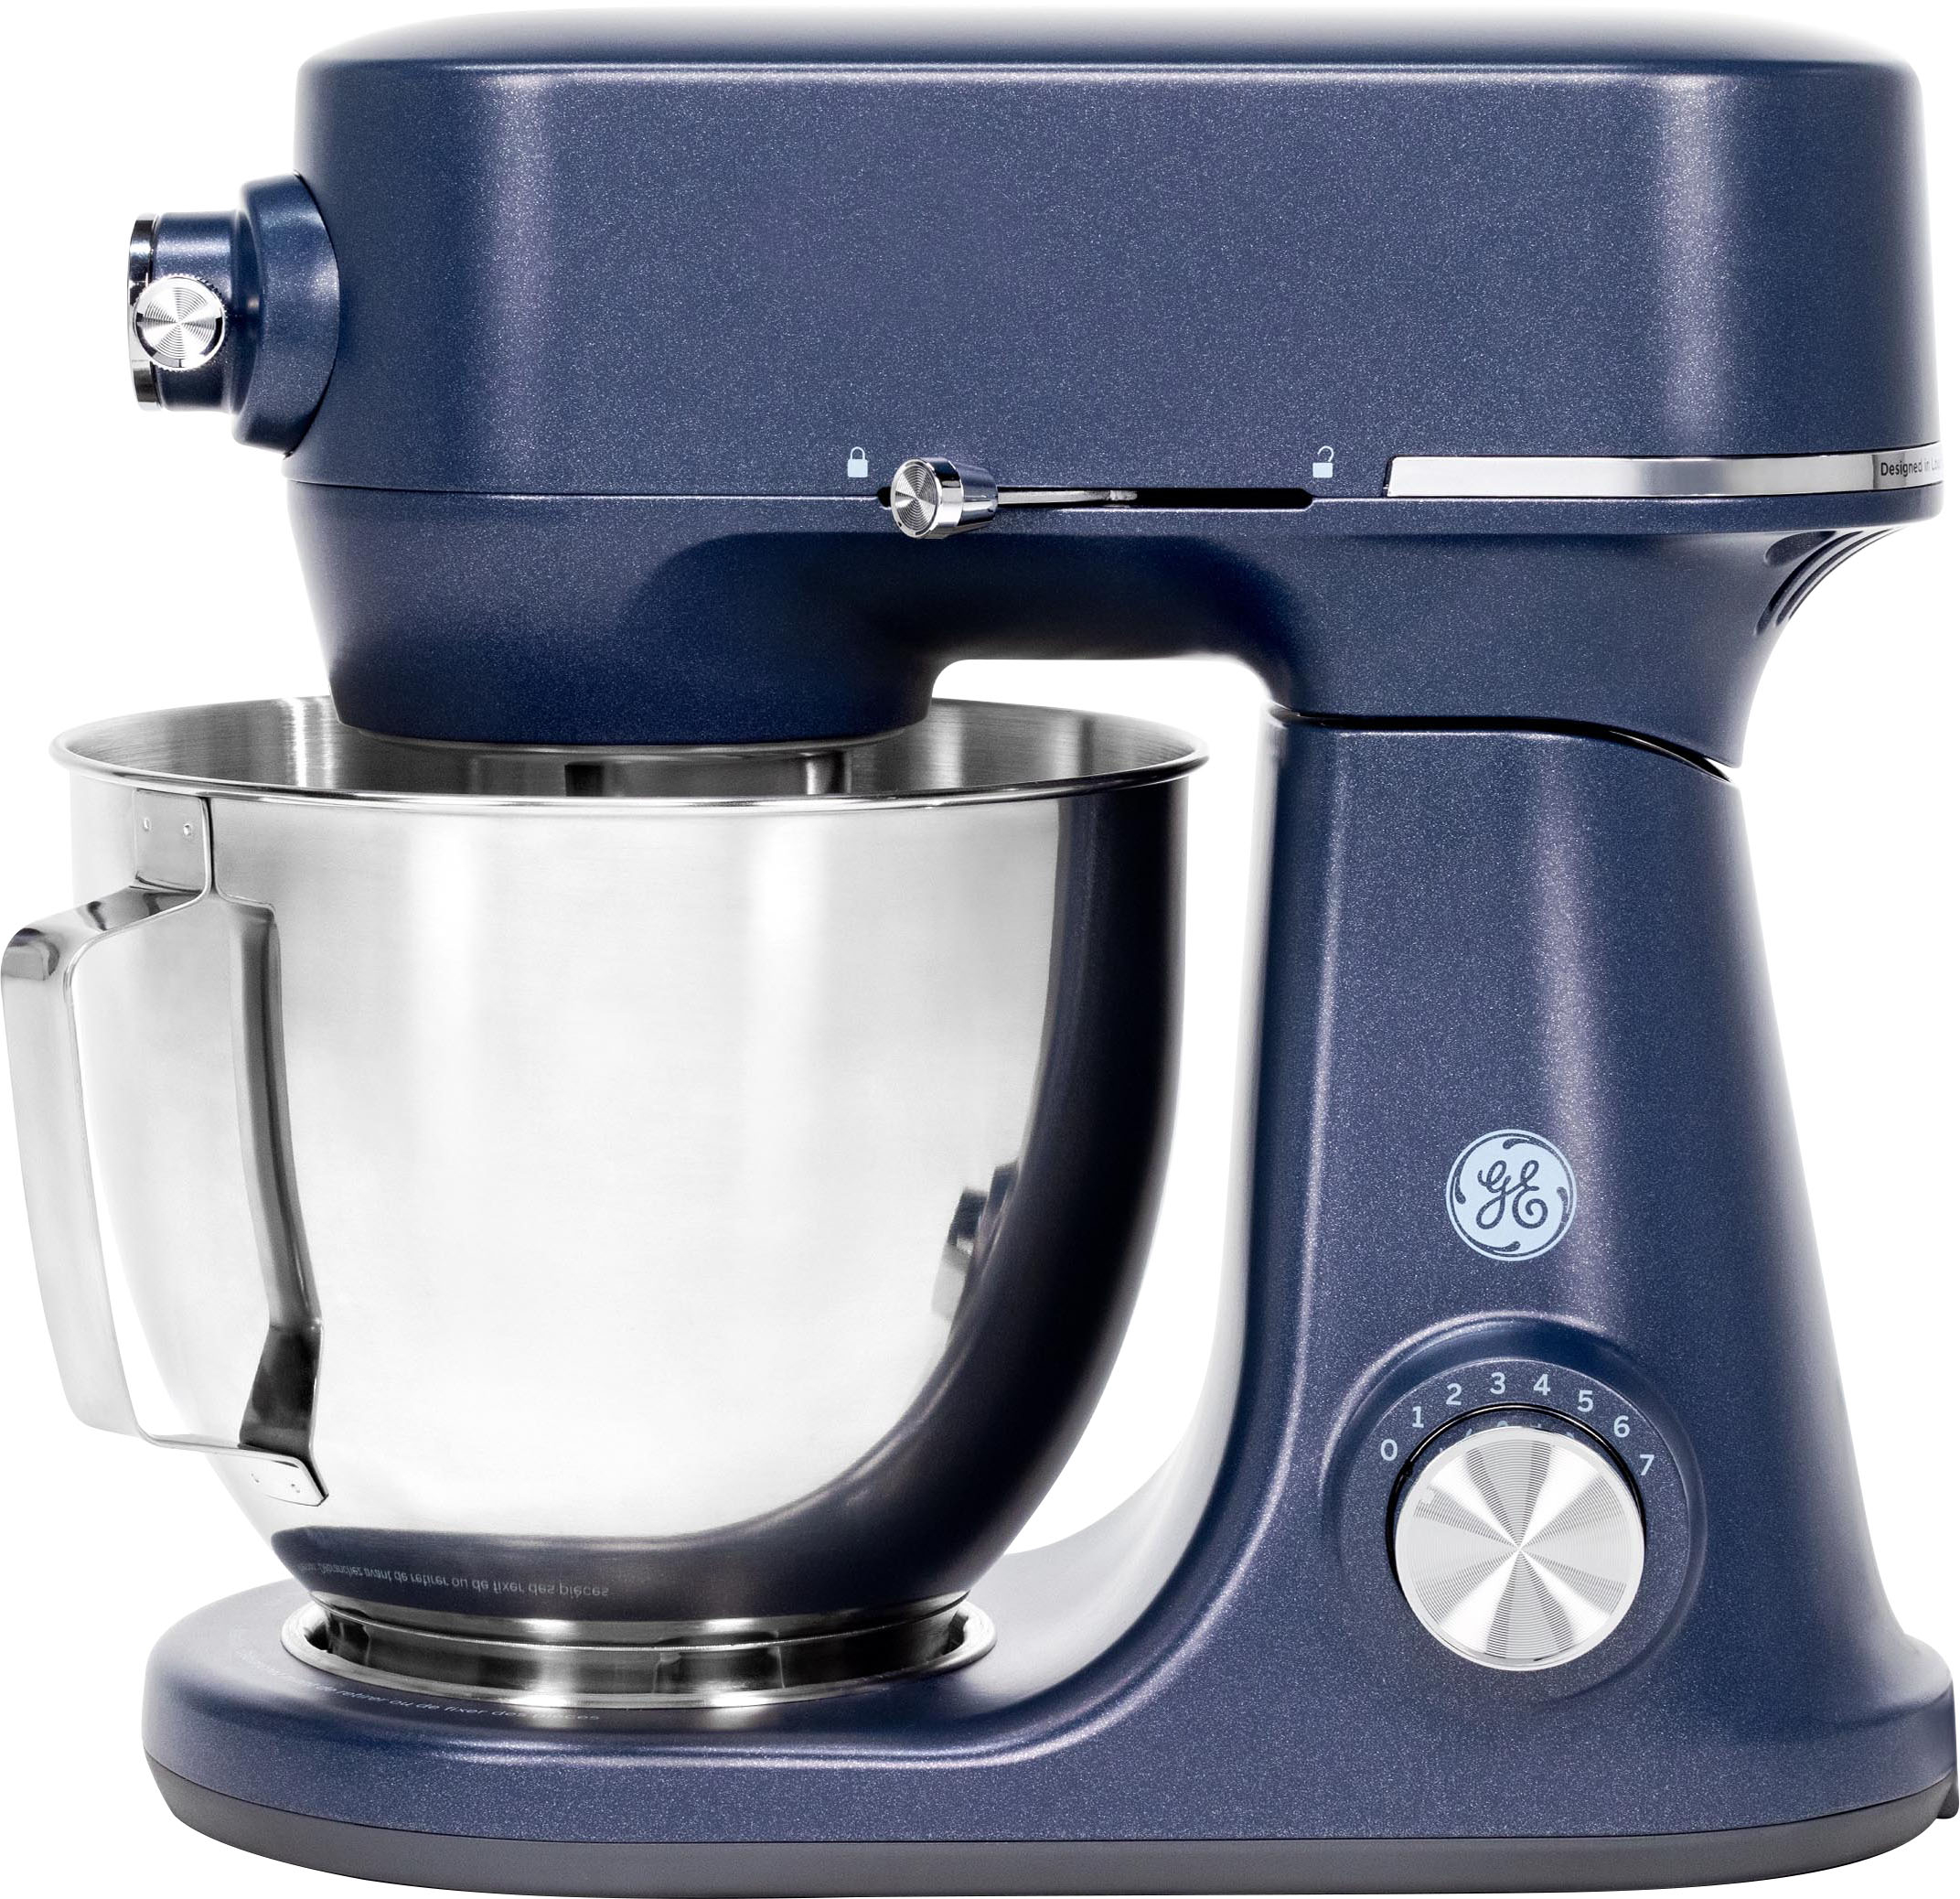 Cake Mixer With Bowl - Best Buy